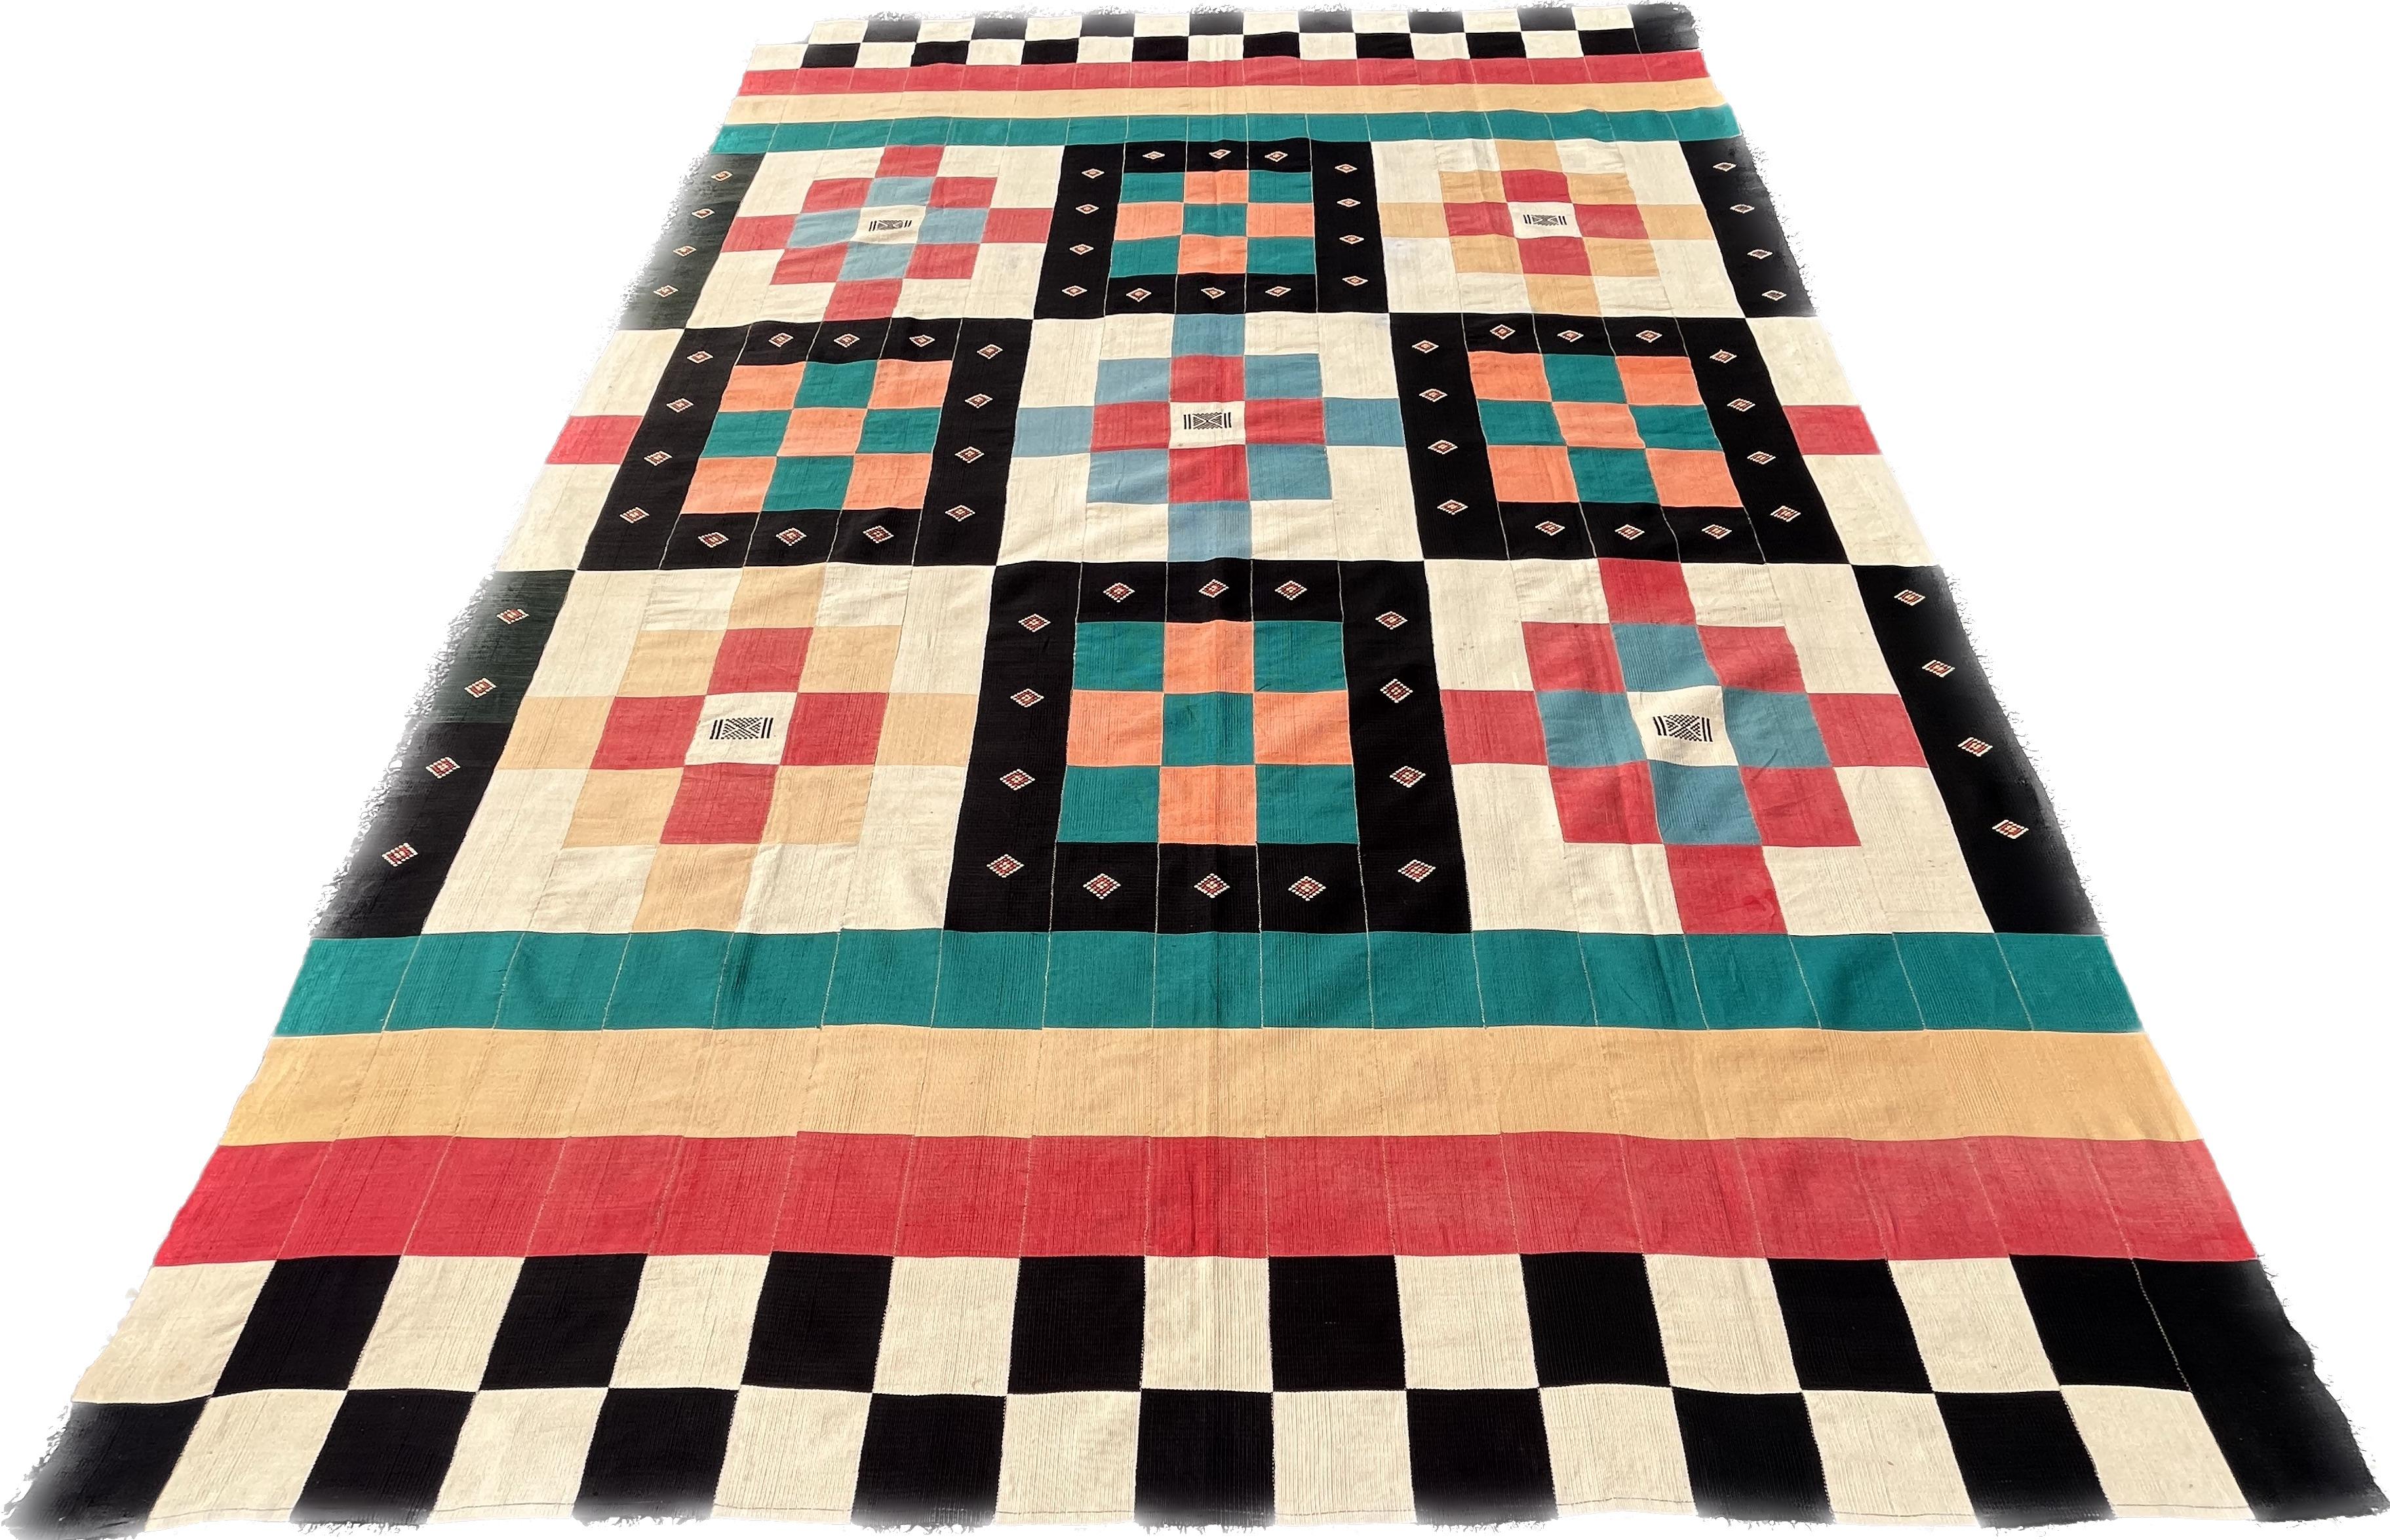 Modern Kilim Fabric Rug.

“Kilim” is a Turkish word designating the technique of flat weaving (or tapestry). This carpet manufacturing technique is different from that of knotted stitches (velvet appearance), the result is more flexible and